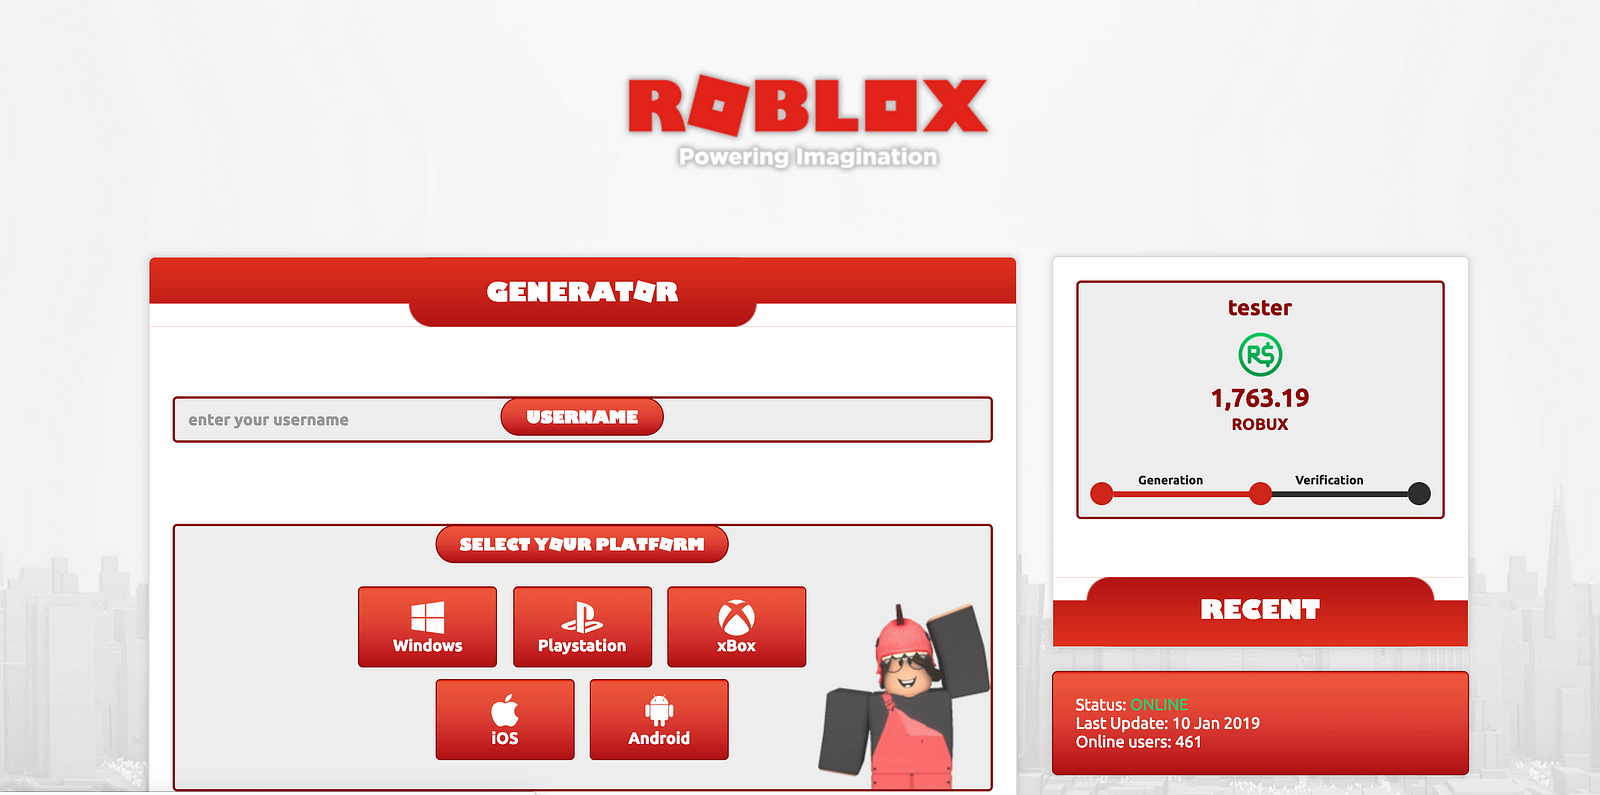 Get Unlimited Robux With The Latest Updated Glitch In Roblox - roblox glitch robux